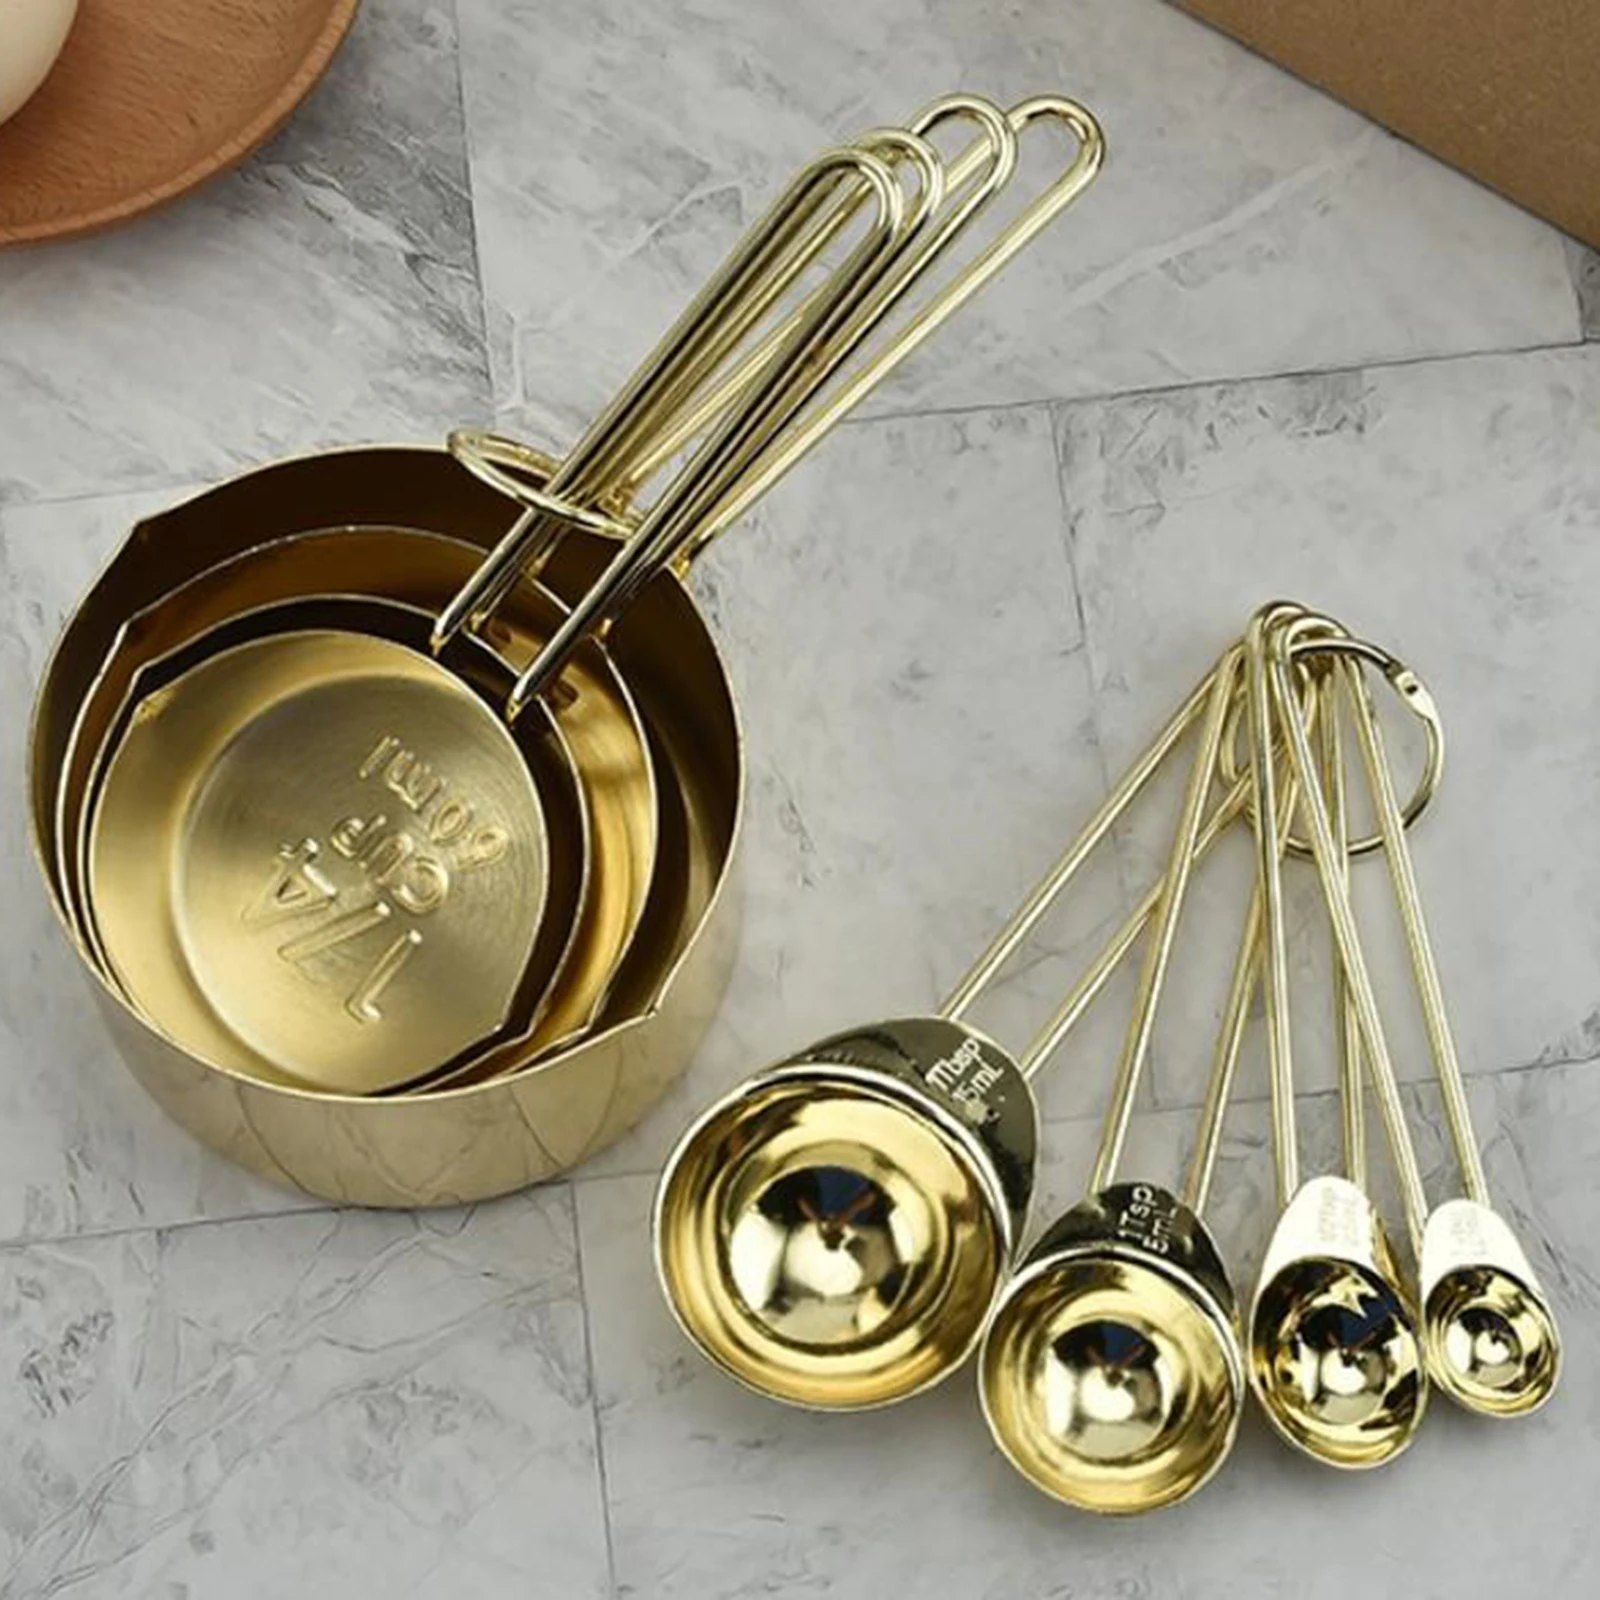 Set of 8 stainless steel measuring cups and spoons that cook with long handle